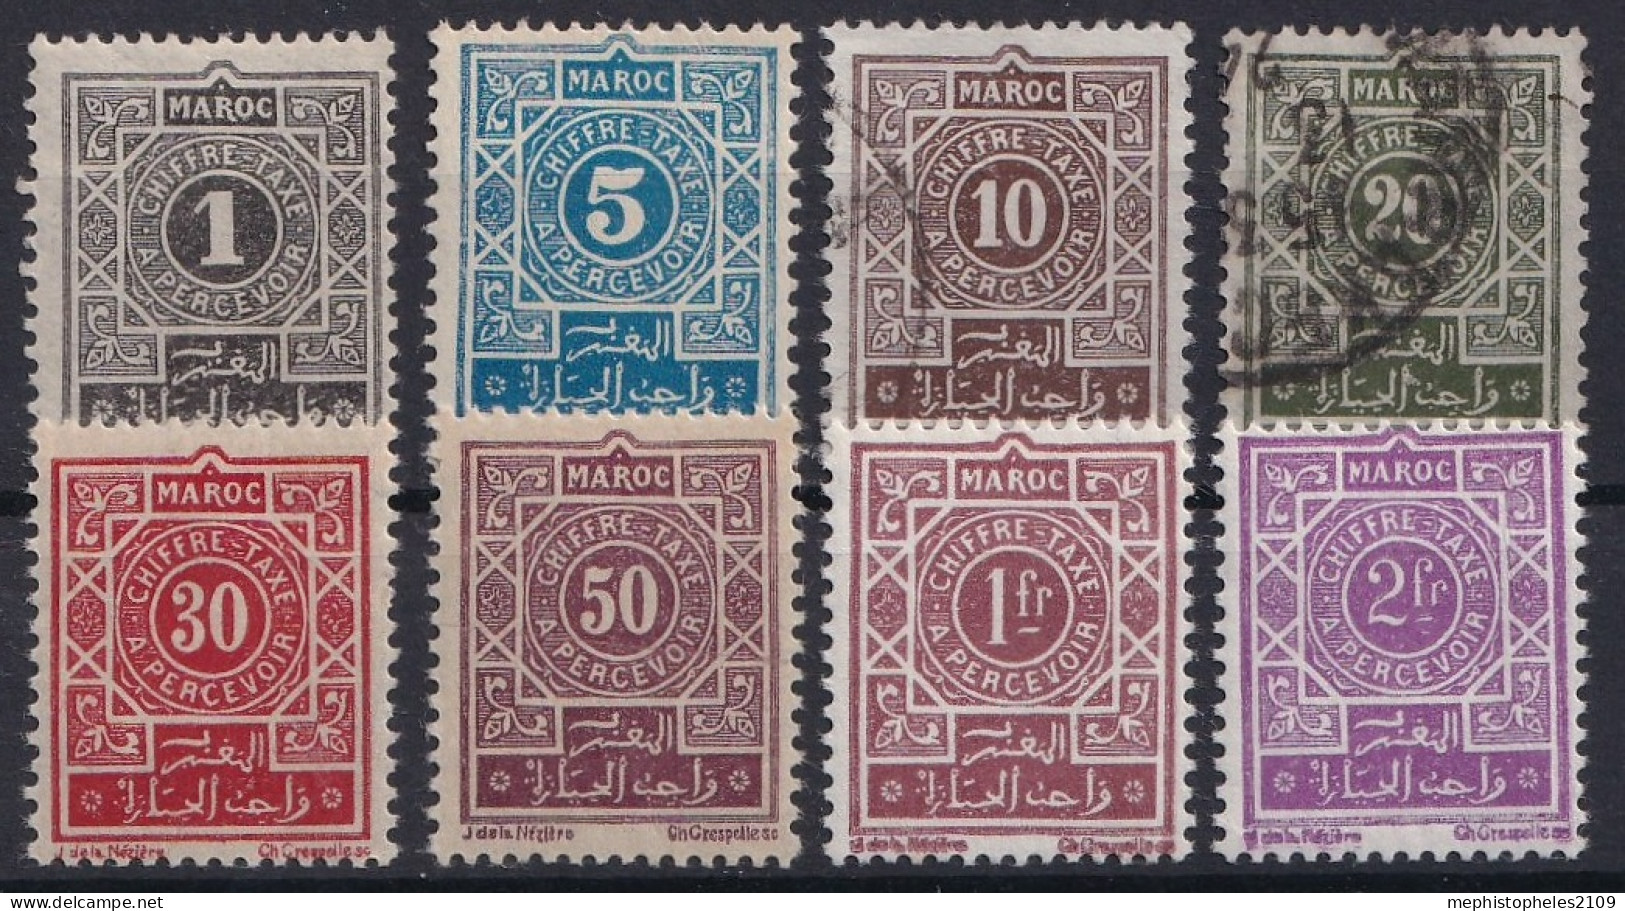 MAROC 1917-26 - MLH/canceled - YT 27-34 - Chiffre Taxe - Complete Set! - Impuestos